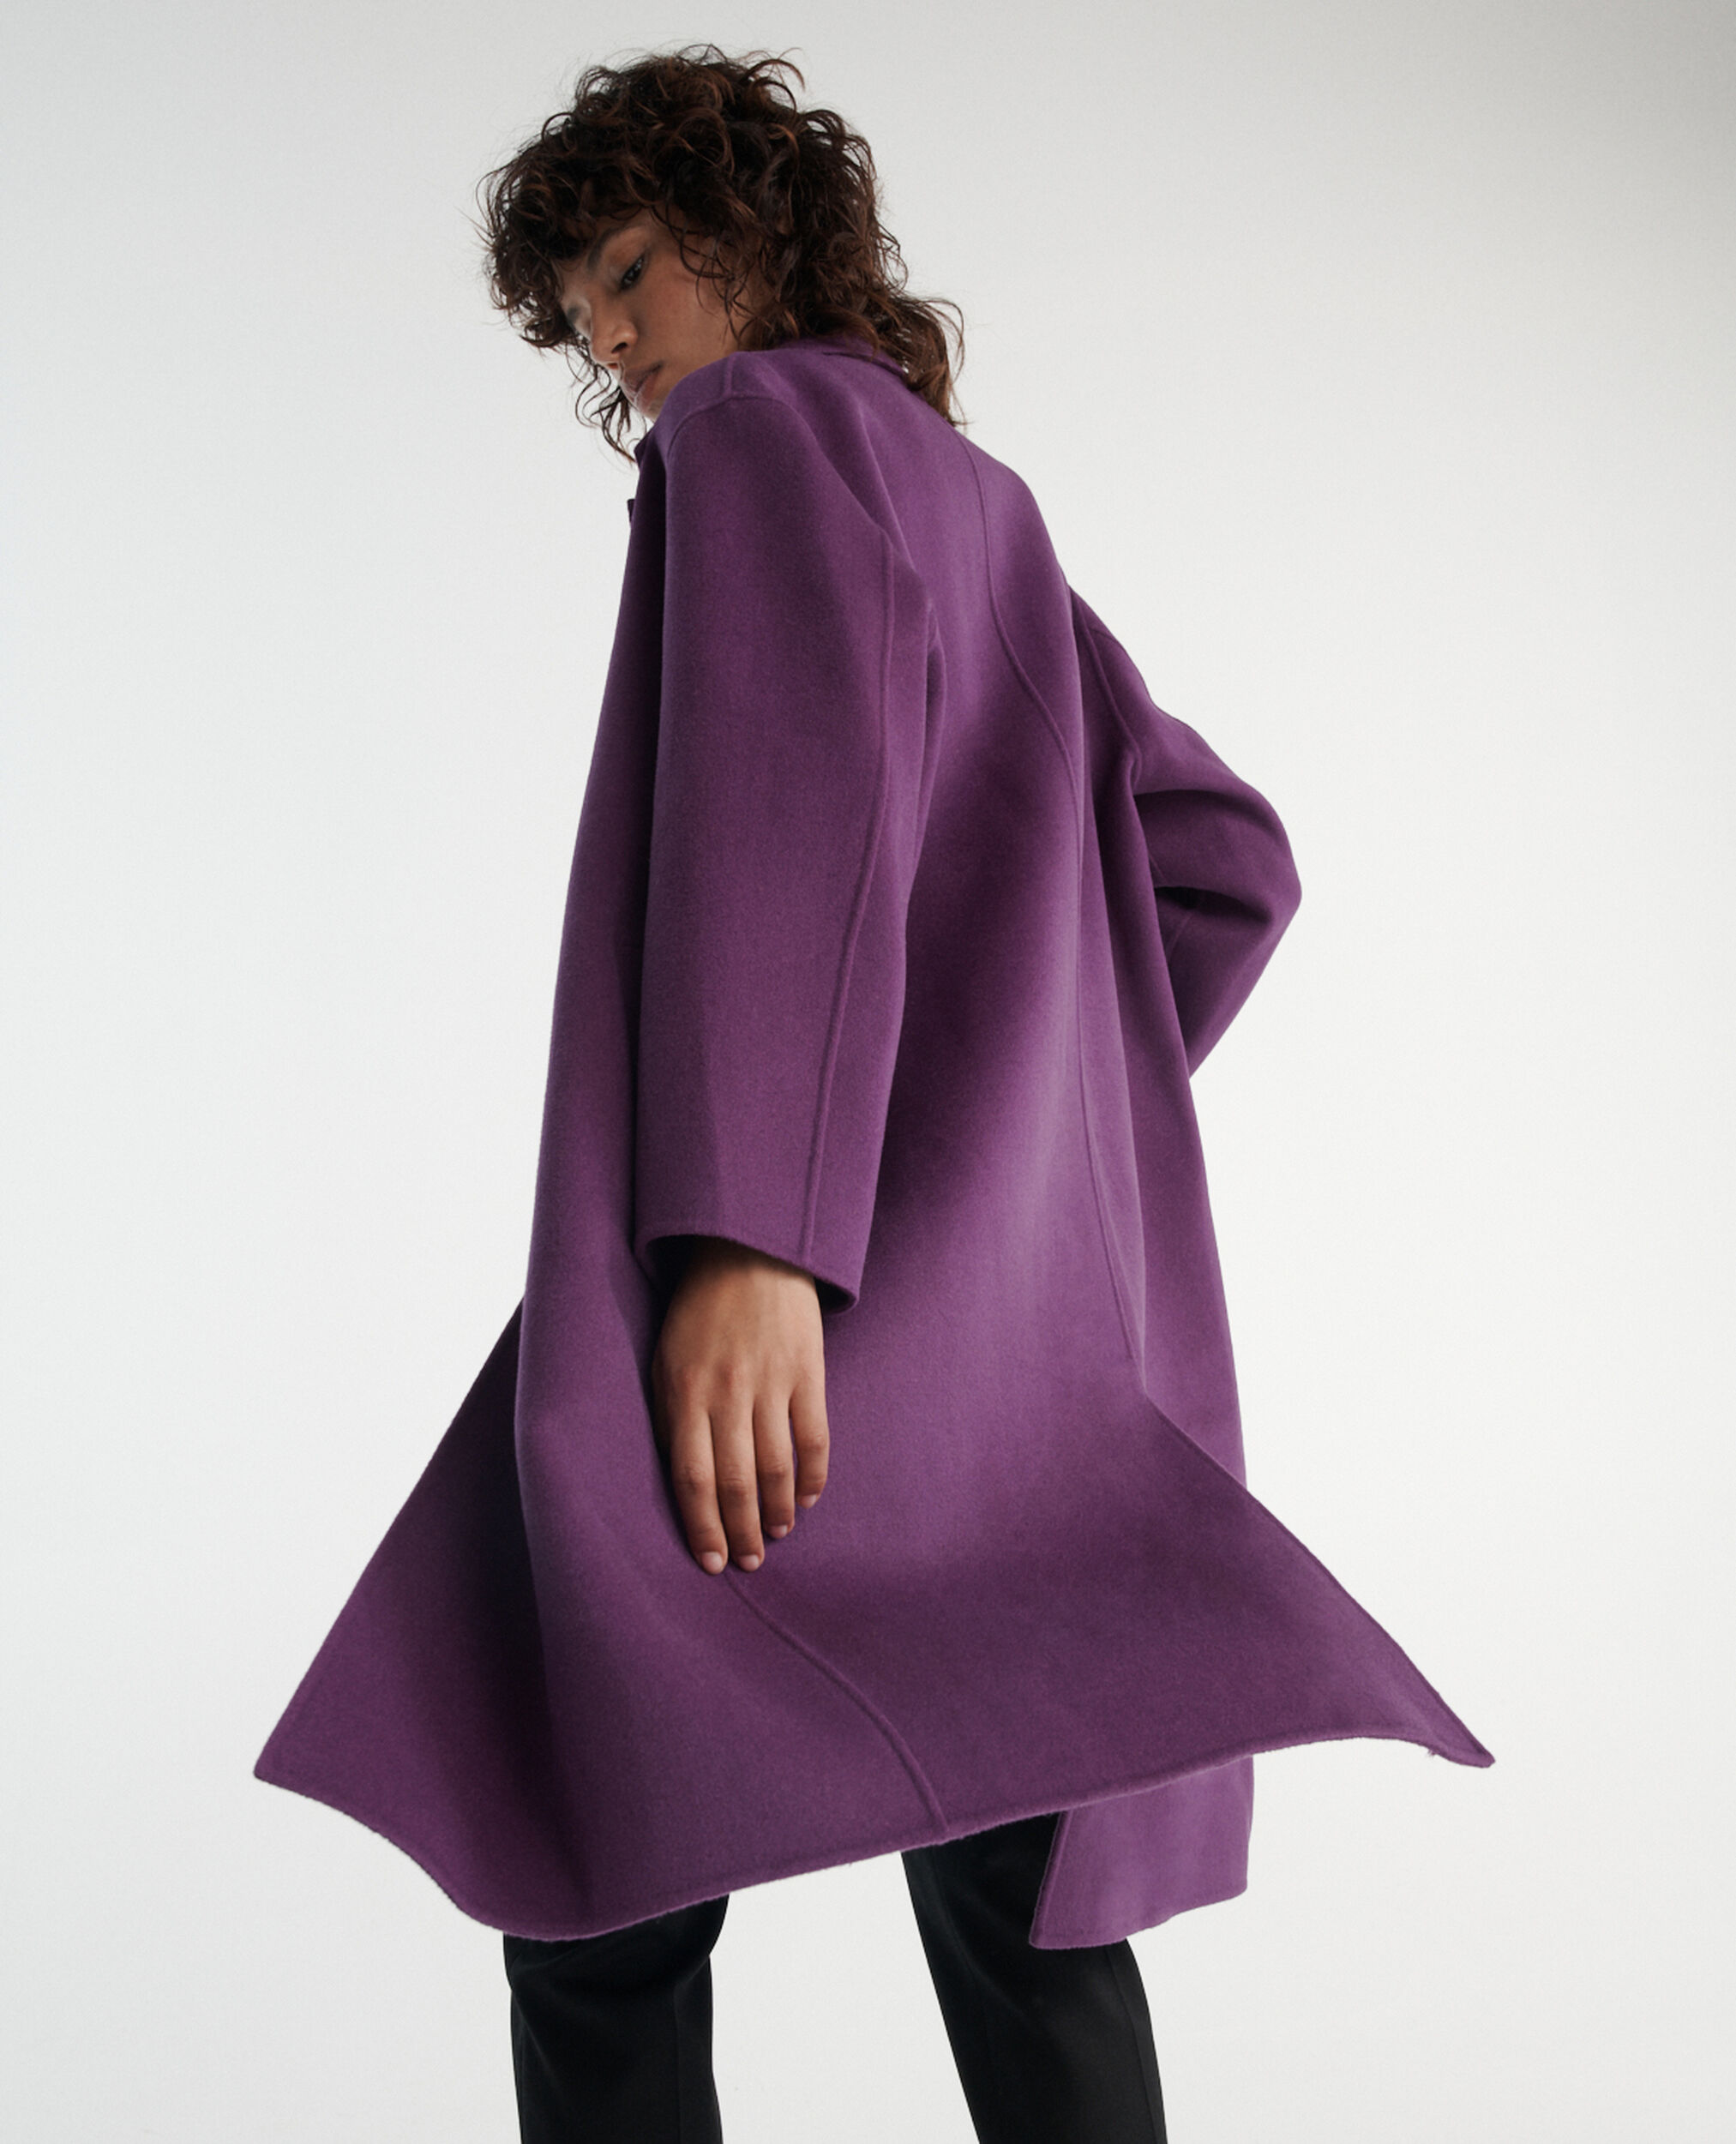 Oversized double-faced purple wool coat, MAUVE, hi-res image number null